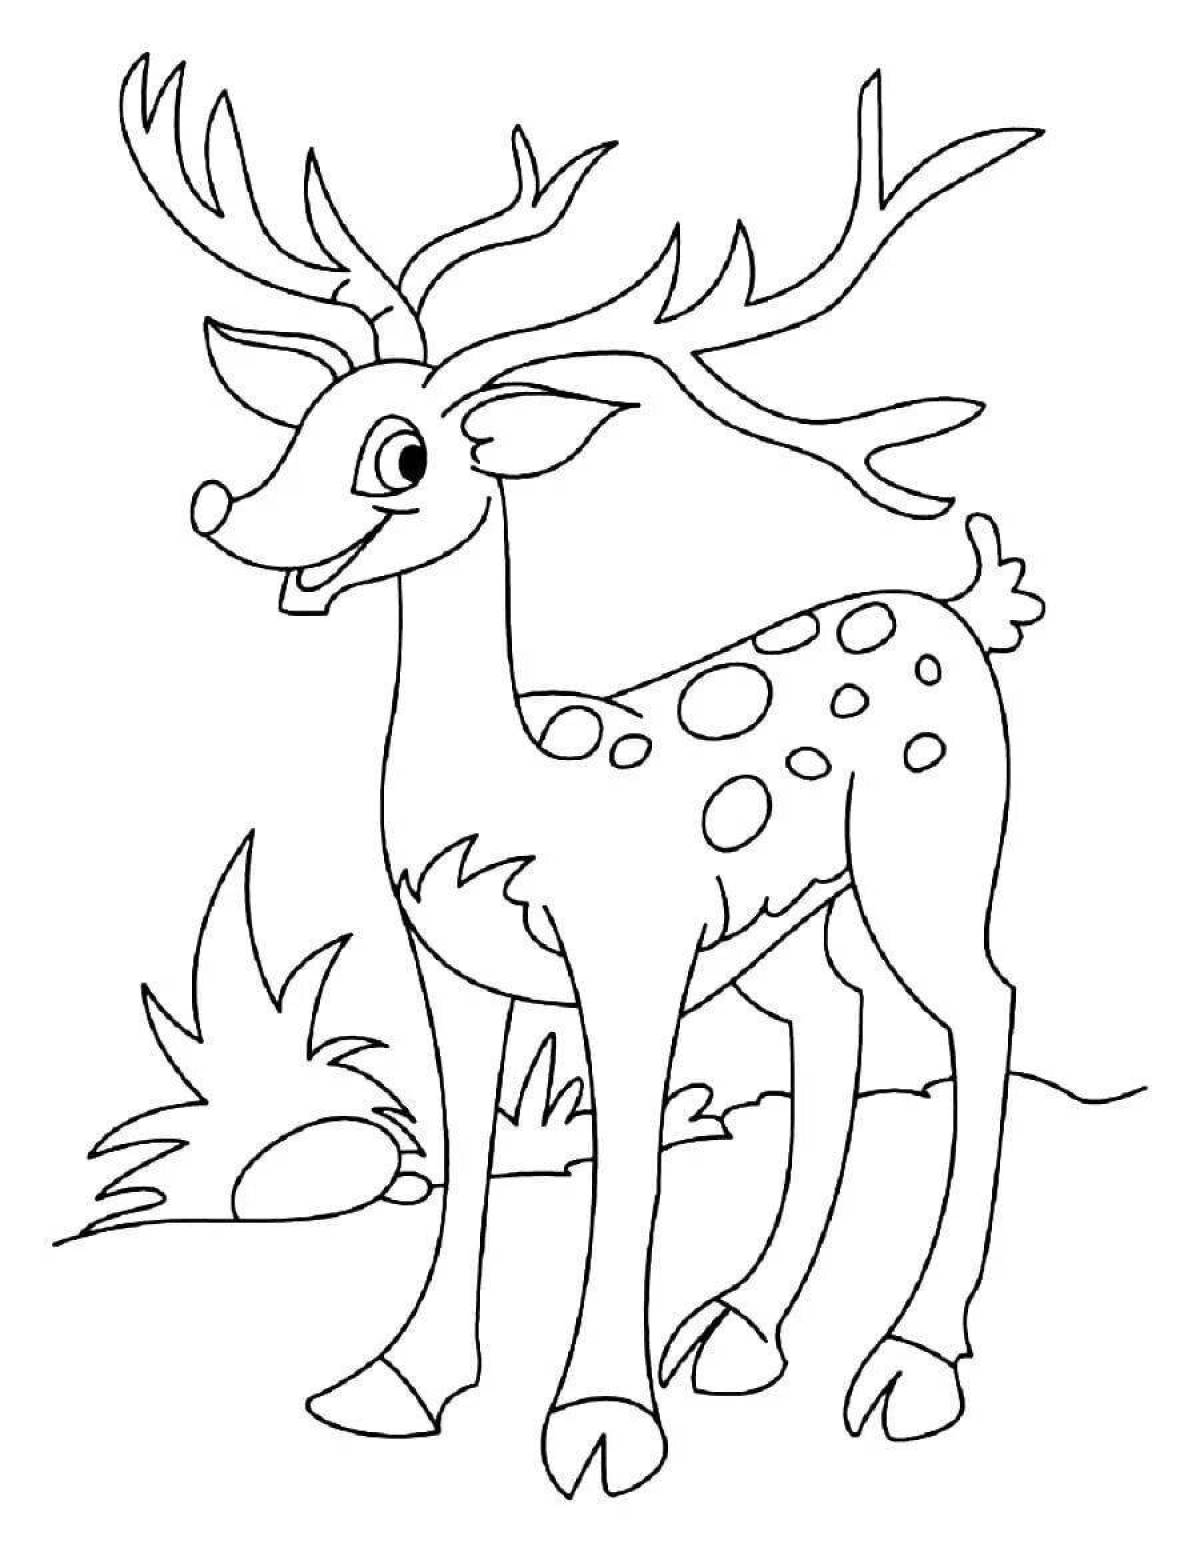 Exciting deer coloring book for kids